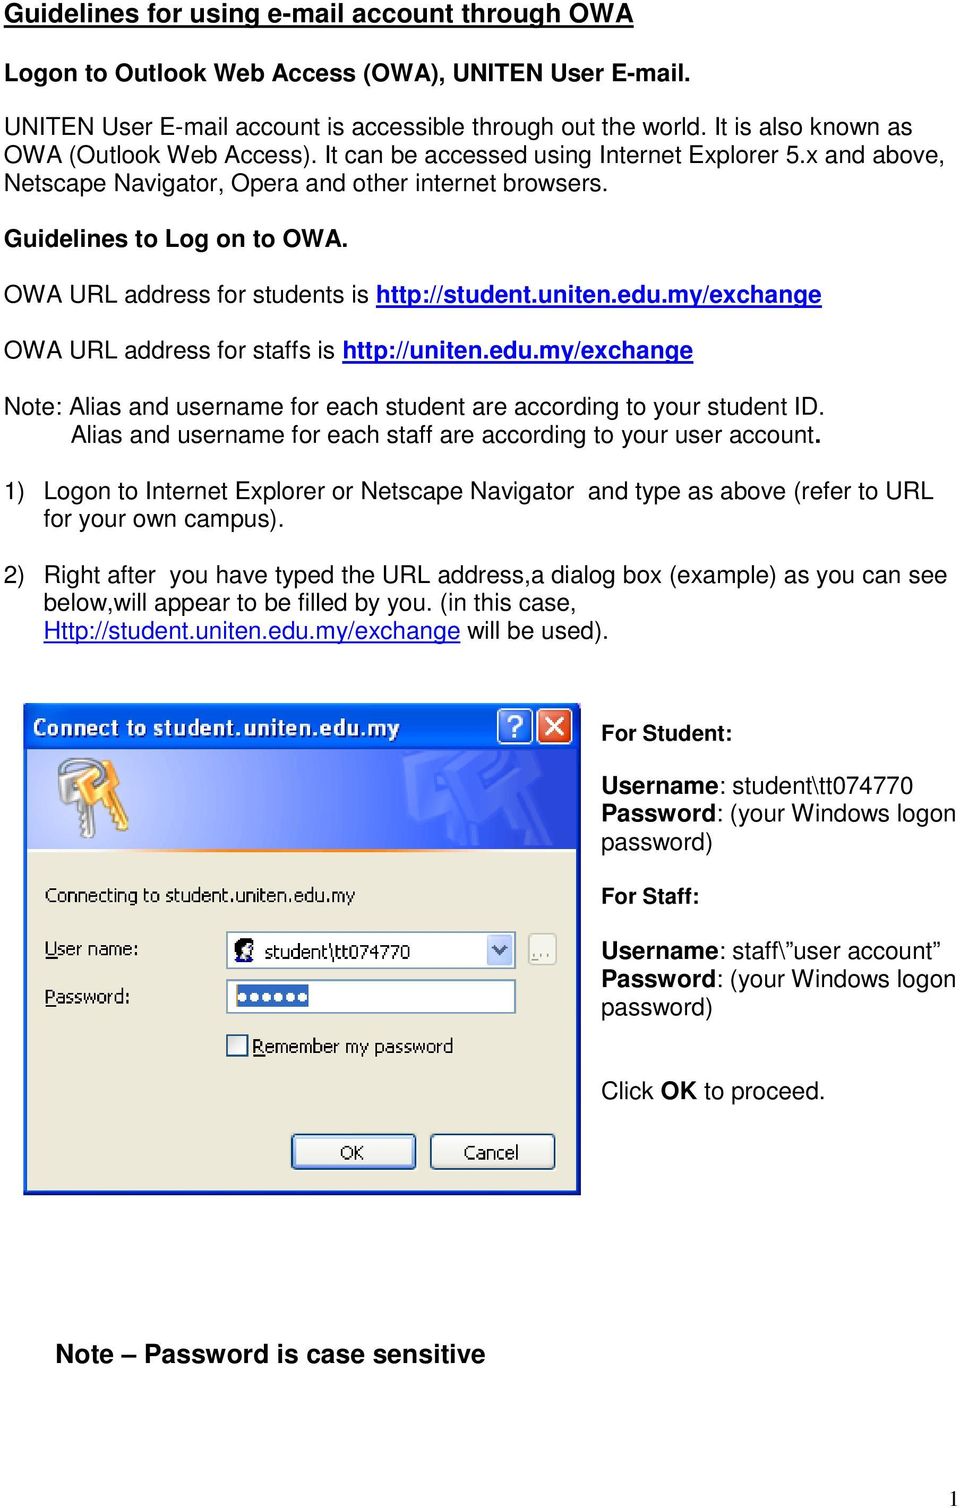 OWA URL address for students is http://student.uniten.edu.my/exchange OWA URL address for staffs is http://uniten.edu.my/exchange Note: Alias and username for each student are according to your student ID.